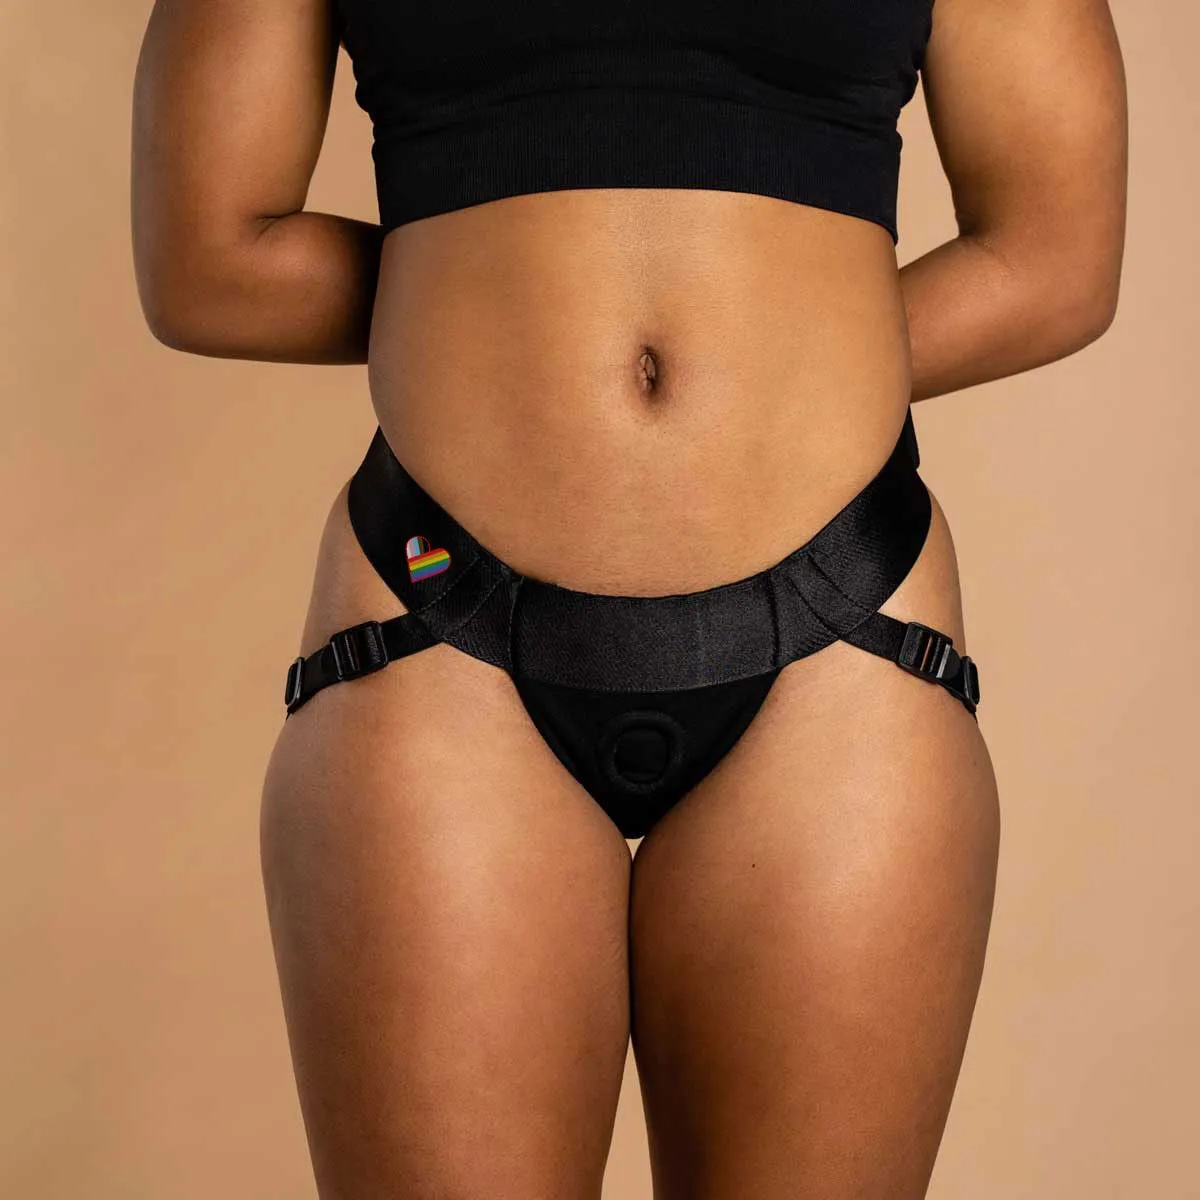 charlene letts add photo black women with strap ons